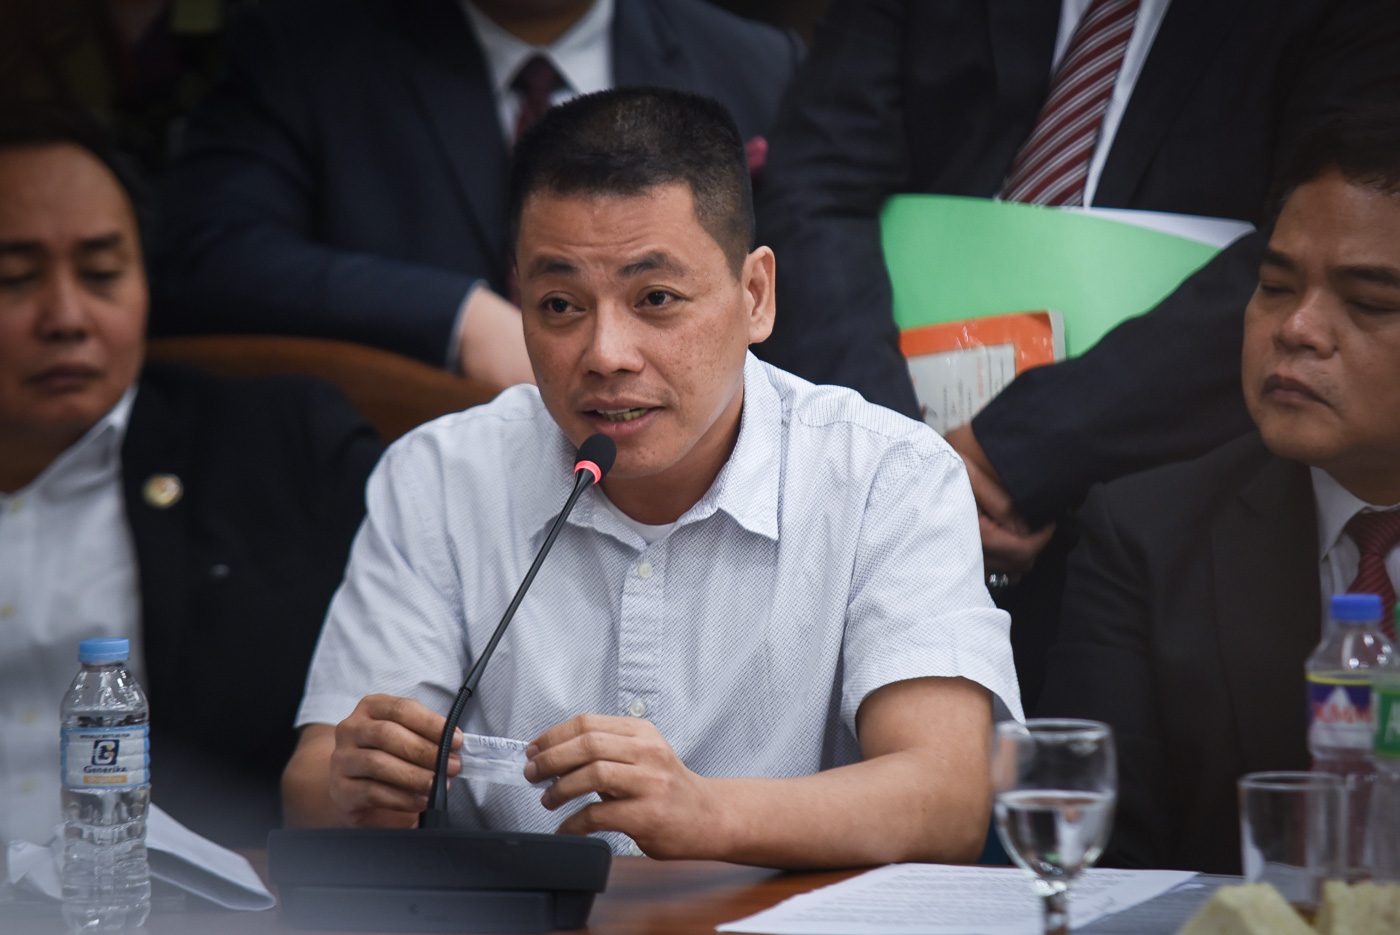 TESTIMONY. Maximum security inmate Herbert Colangco testifies before the House of Representatives Committee on Justice during a hearing on September 20, 2016 on the alleged bribery and drug trade inside the National Bilibid Prison. Photo by LeAnne Jazul/Rappler 